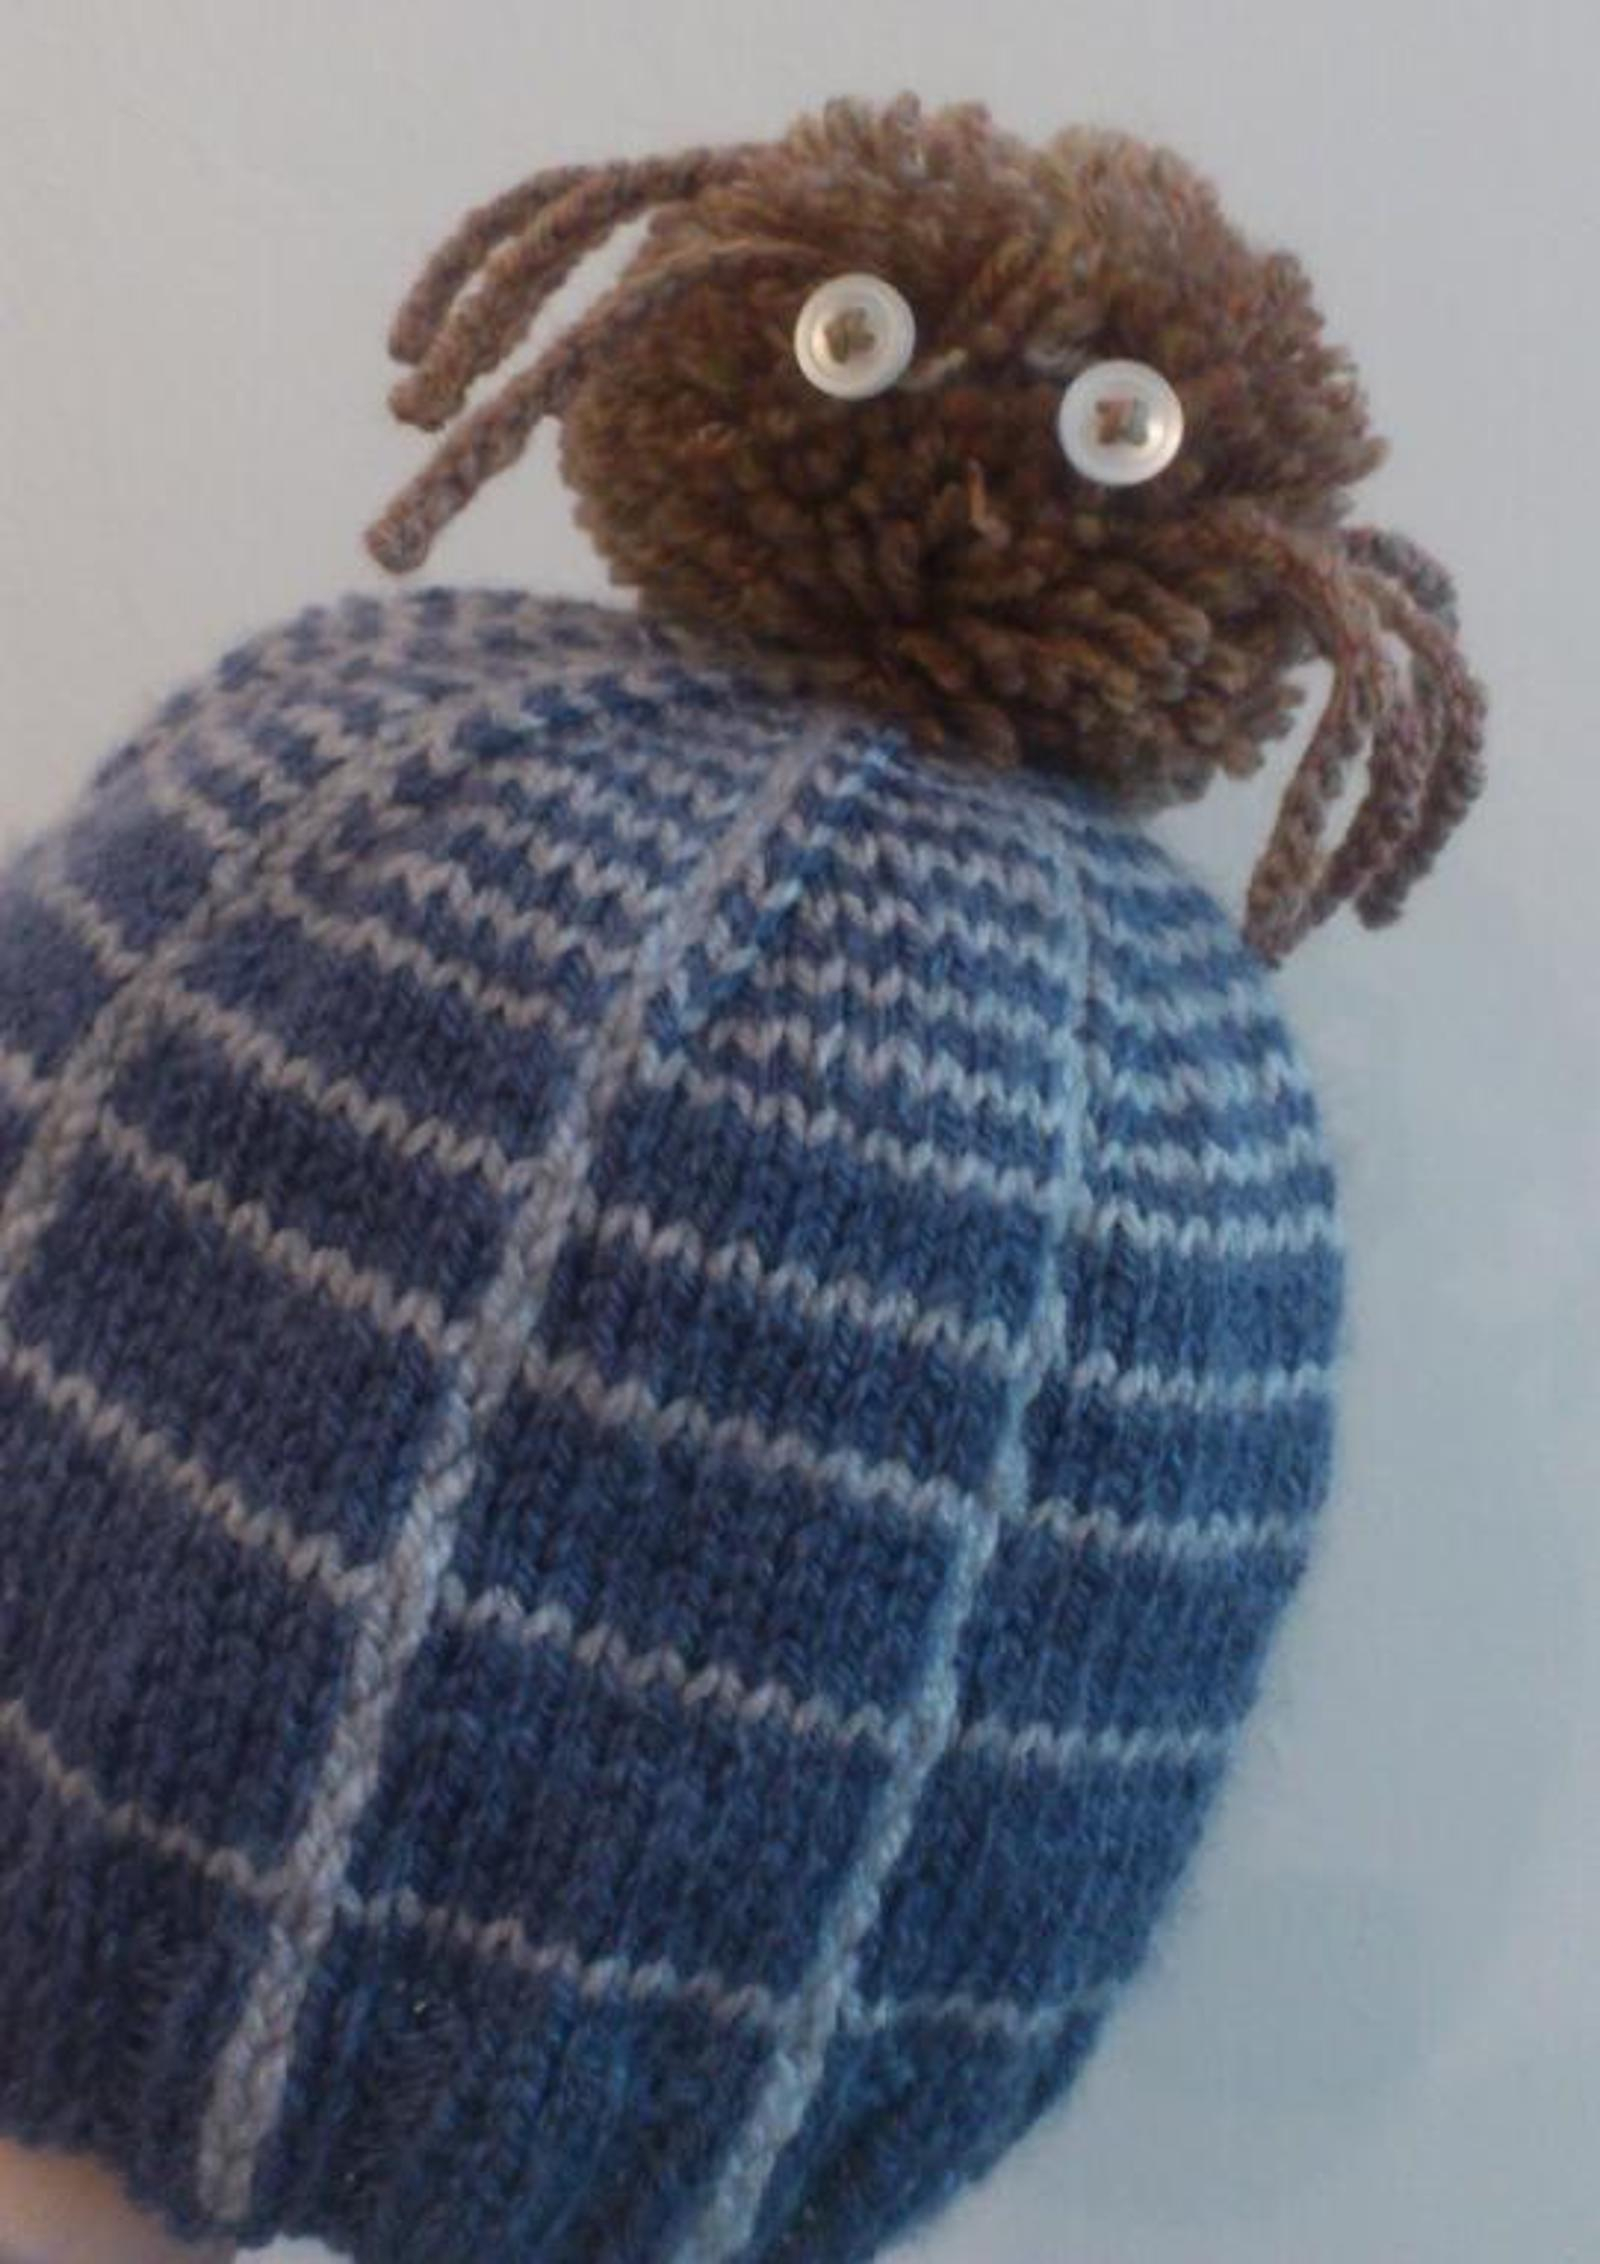 Spider Knitting Pattern Bobble Hat Knitting Patterns For Precious Bas Little Head